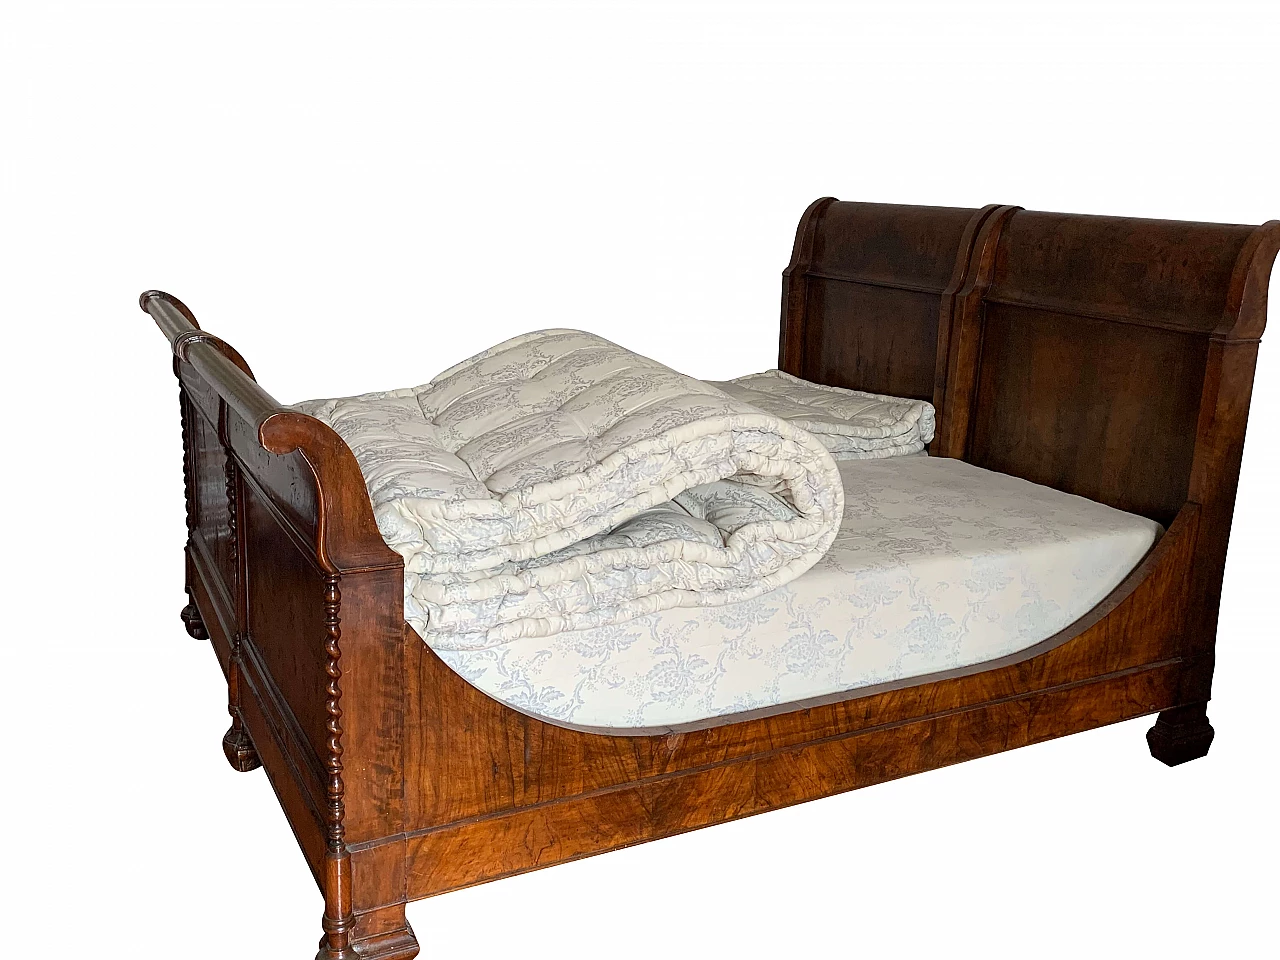 Wooden boat bed, early 20th century 1302725